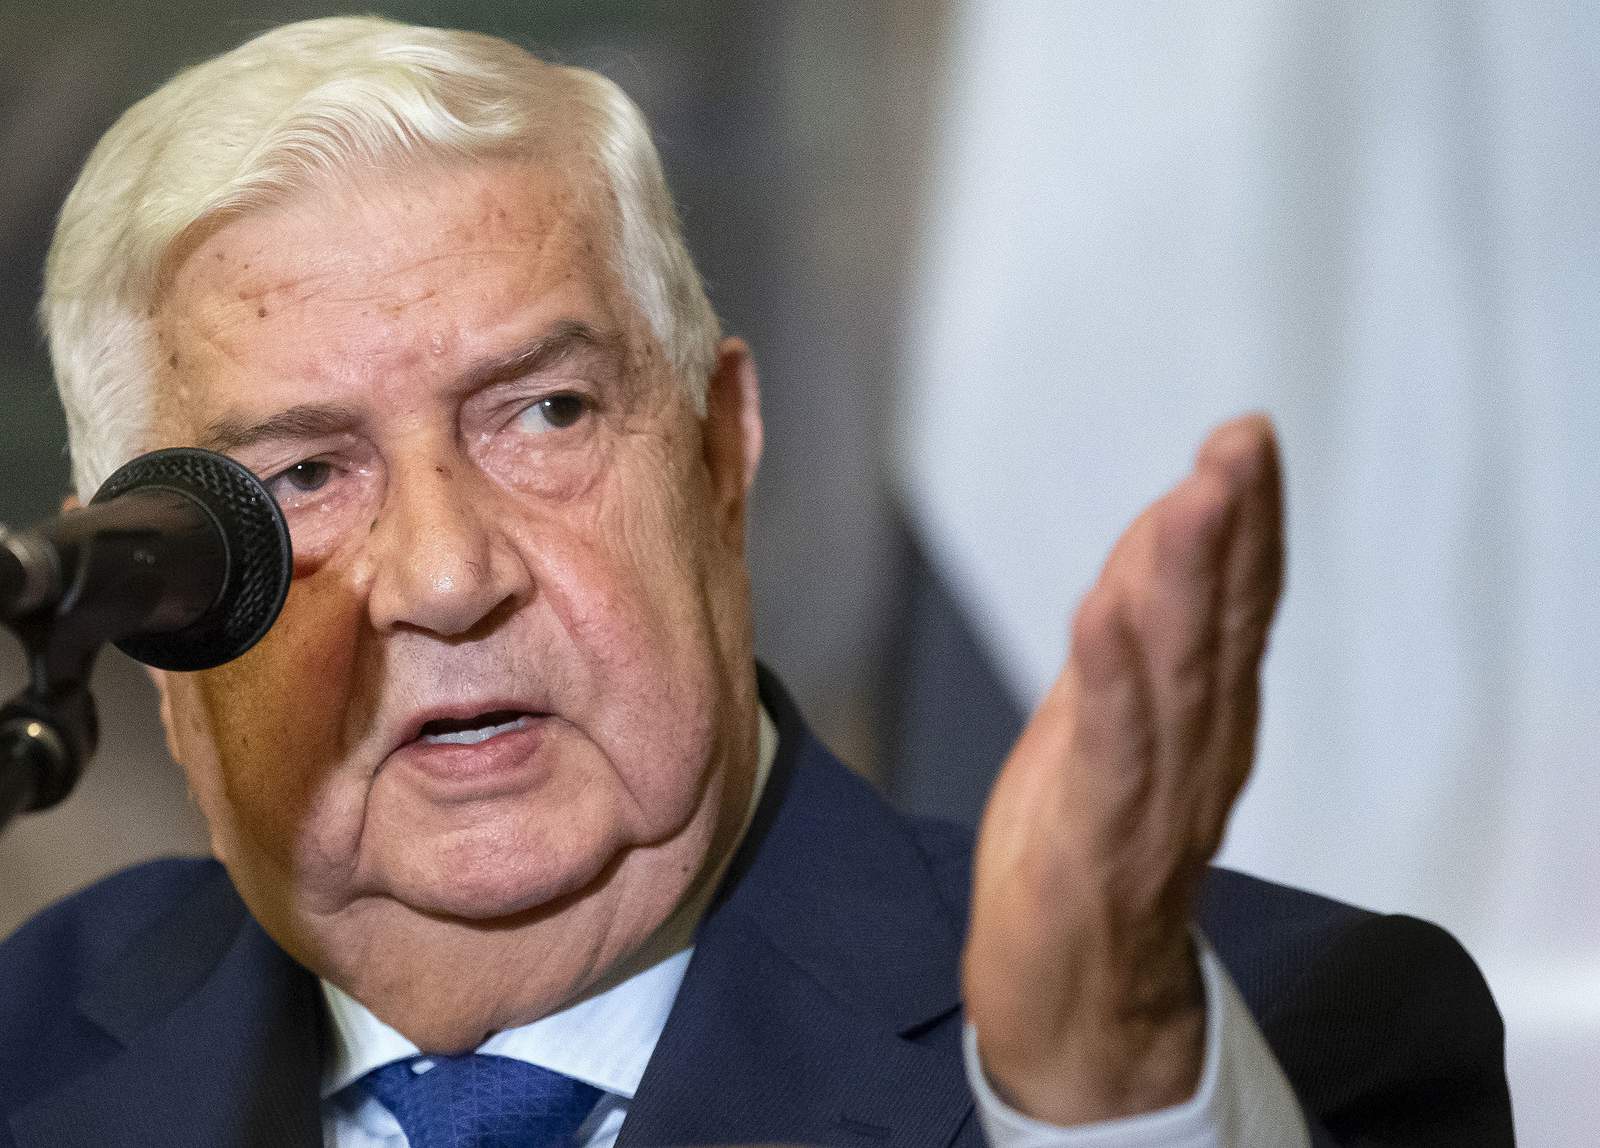 Syria’s longtime Foreign Minister al-Moallem dies at age 79